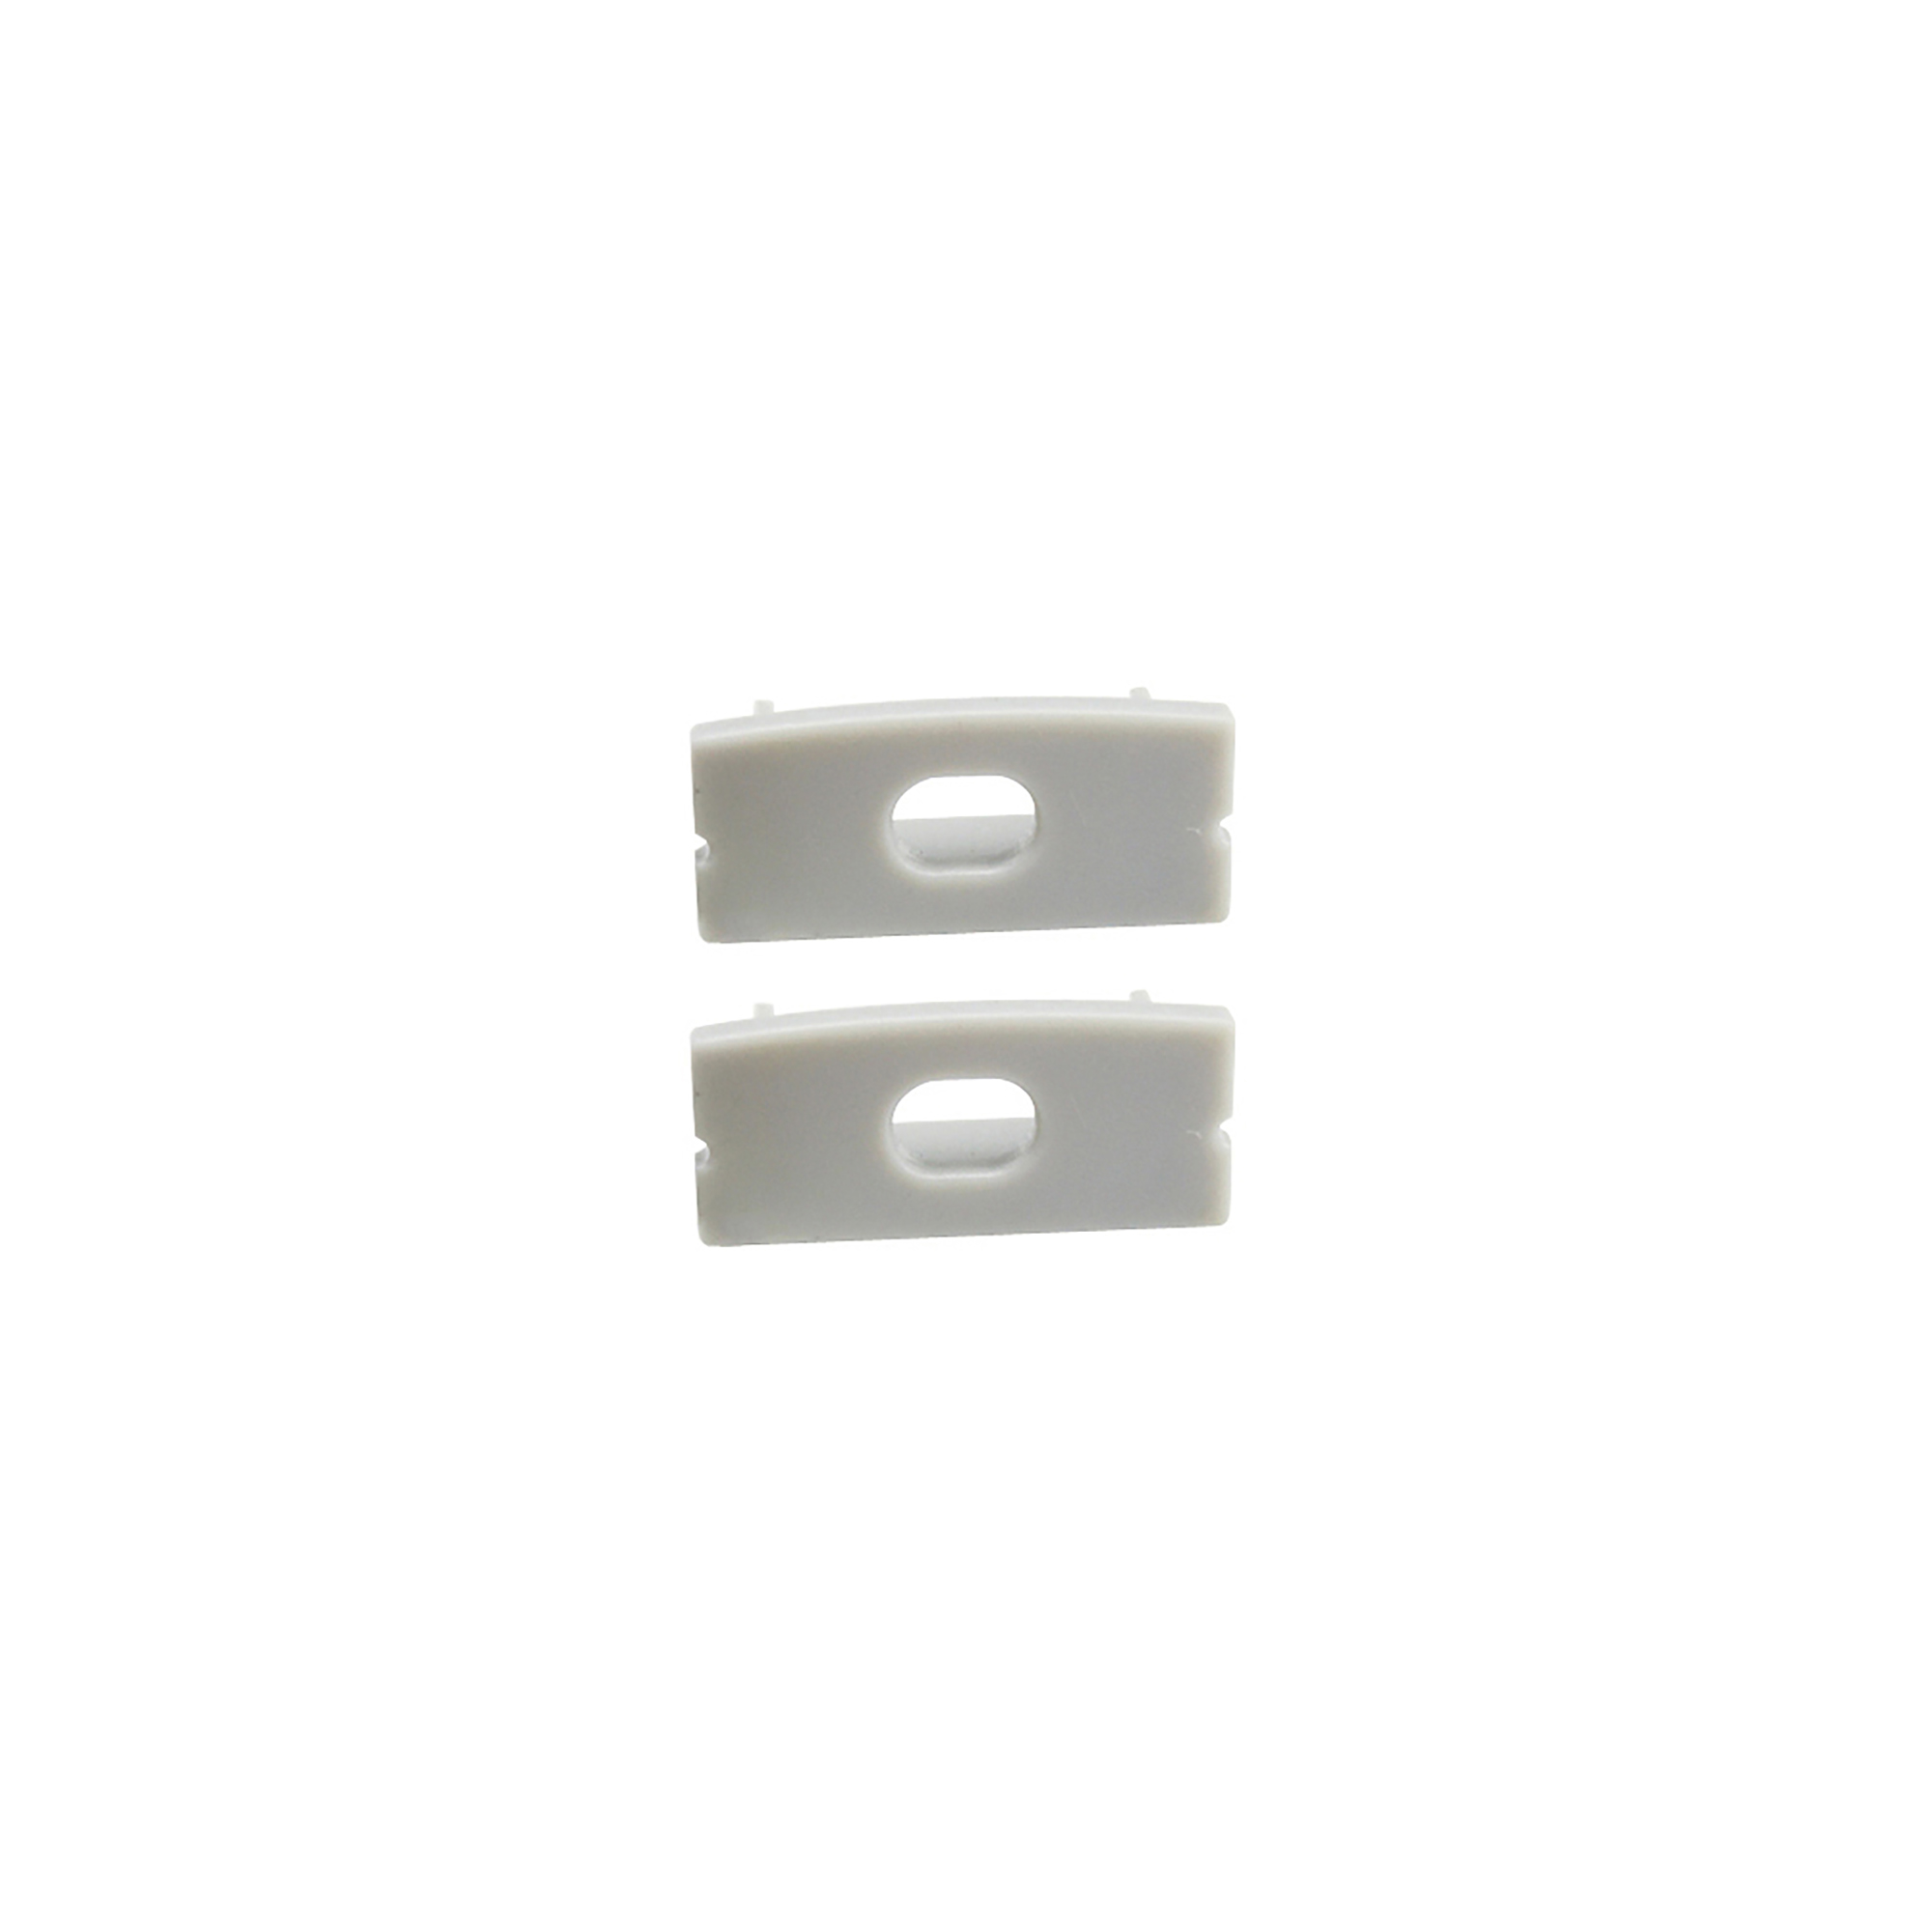 DA930145  Lin 2310, (4 pcs) Endcap With Hole For DA900044 23x10mm Suitable For Cable Entry